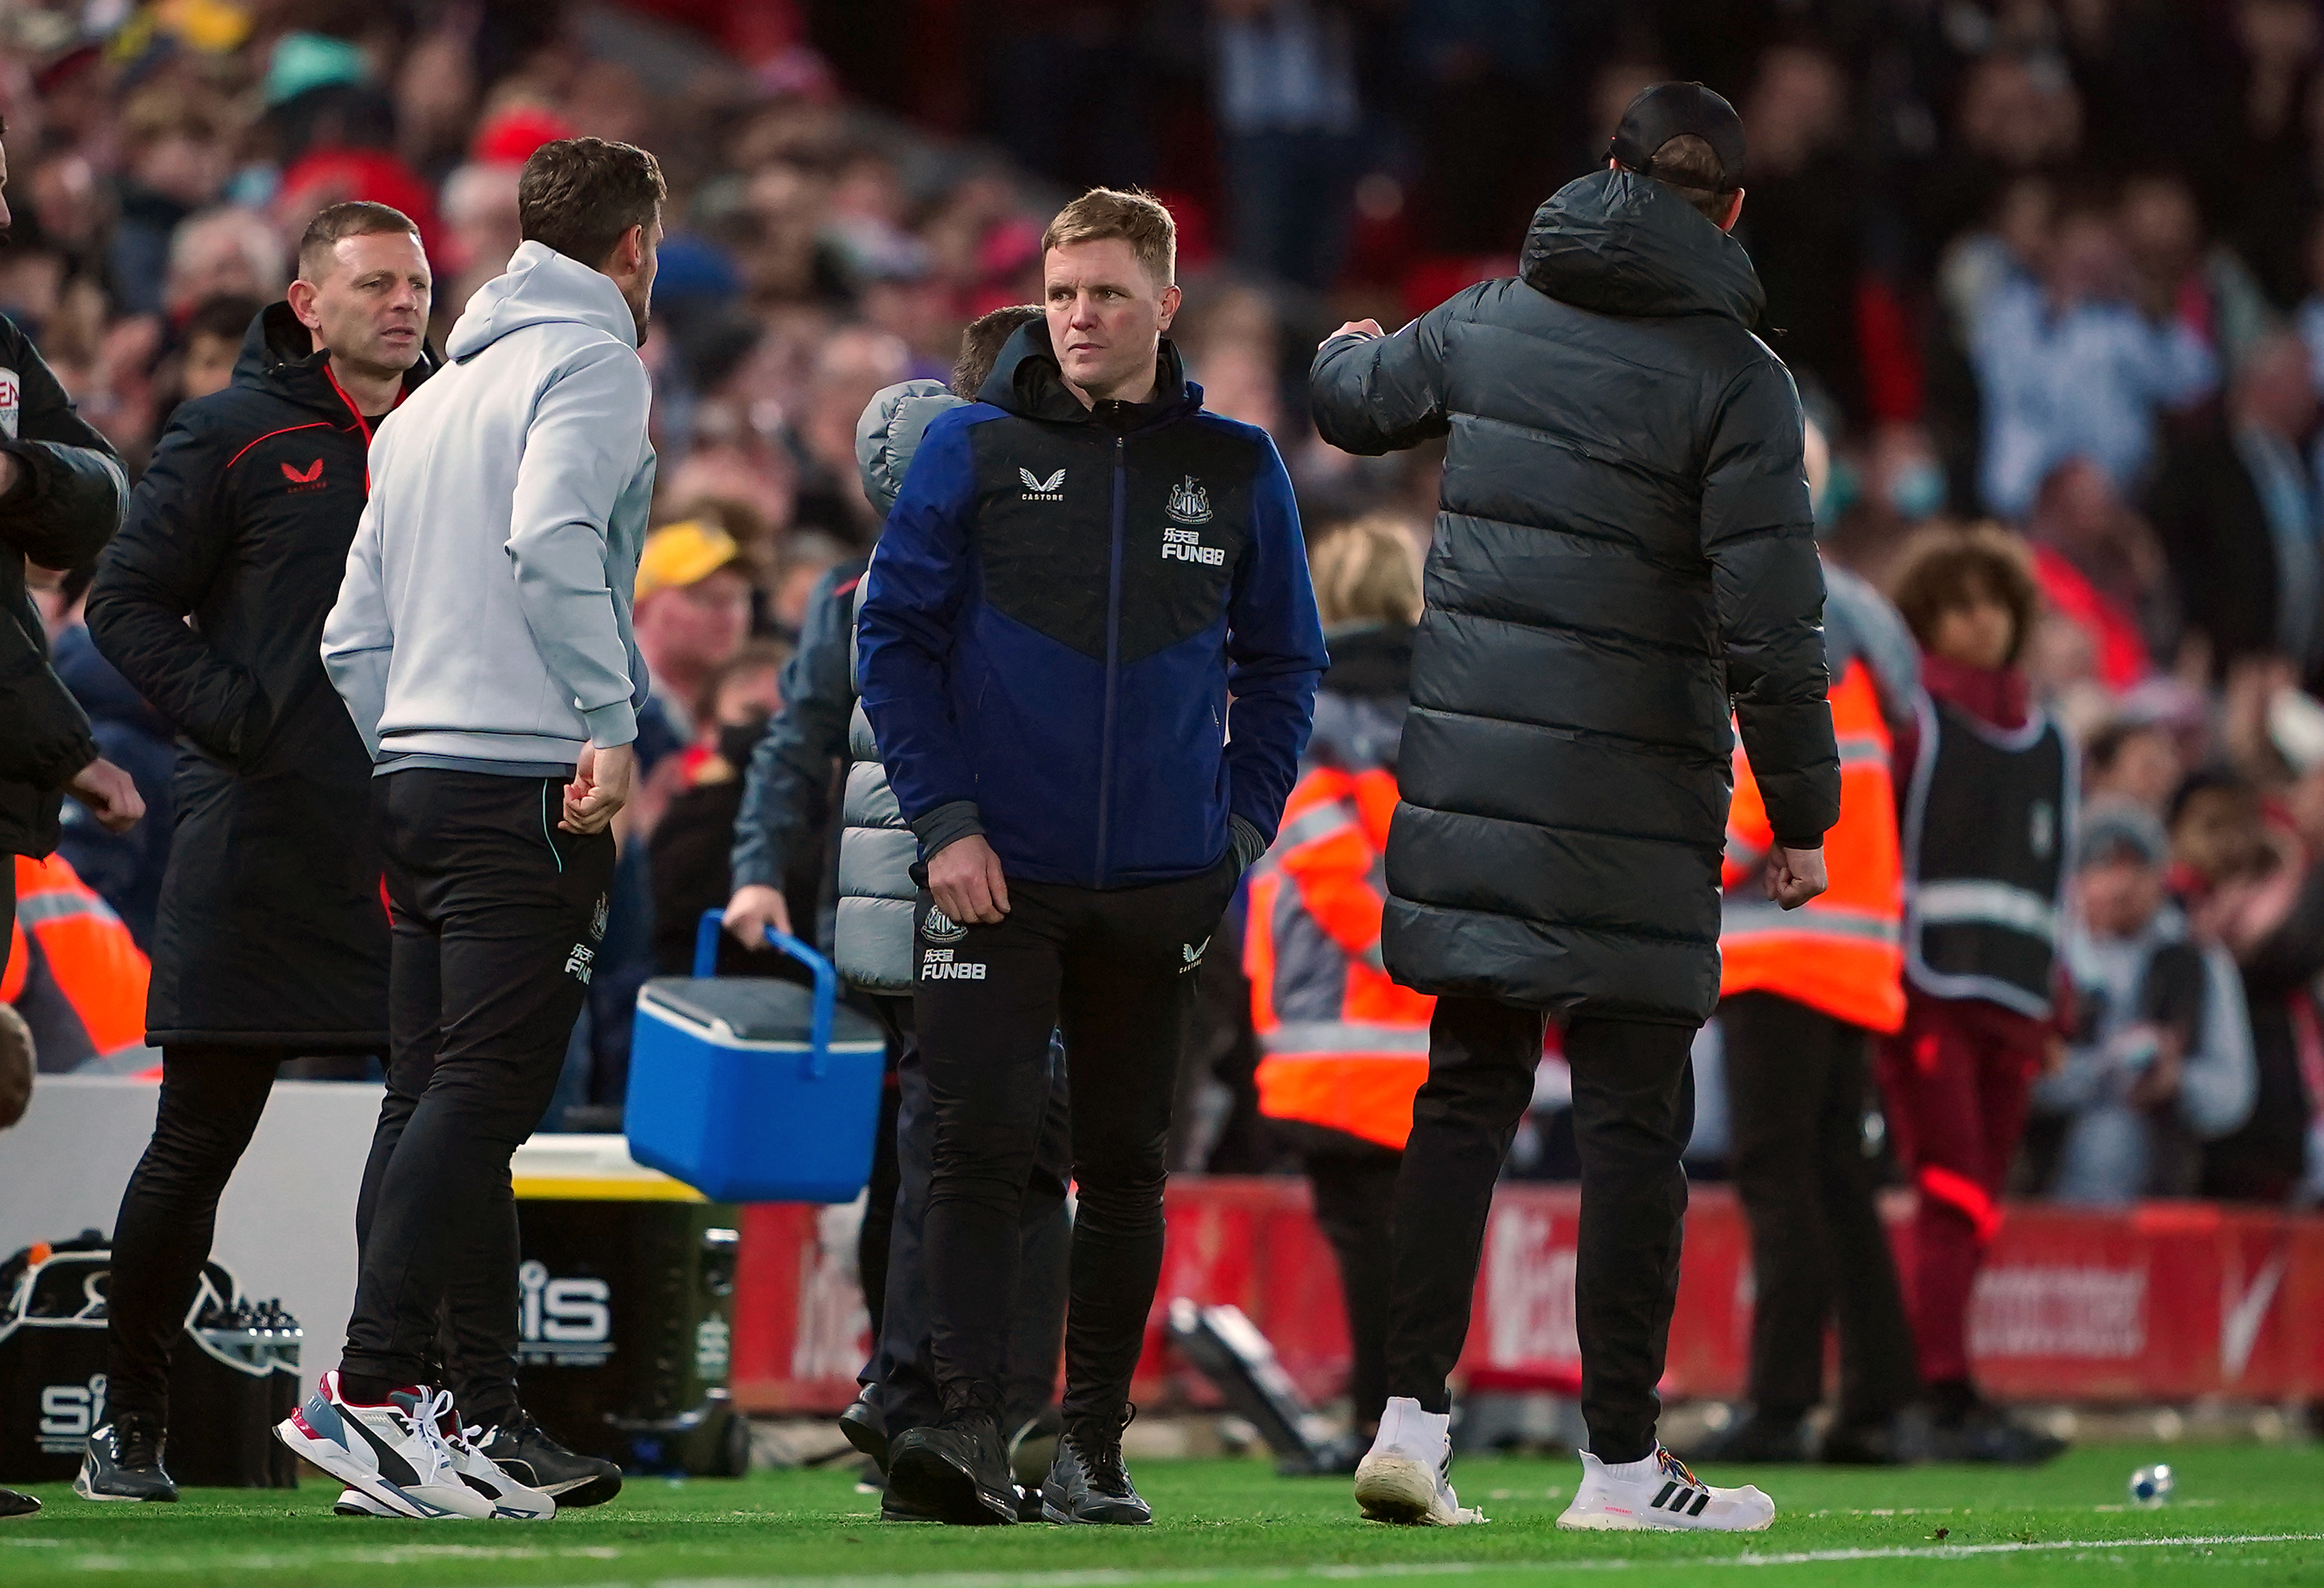 Newcastle boss Eddie Howe and Liverpool manager Jurgen Klopp (right) have had differences of opinion on the sideline